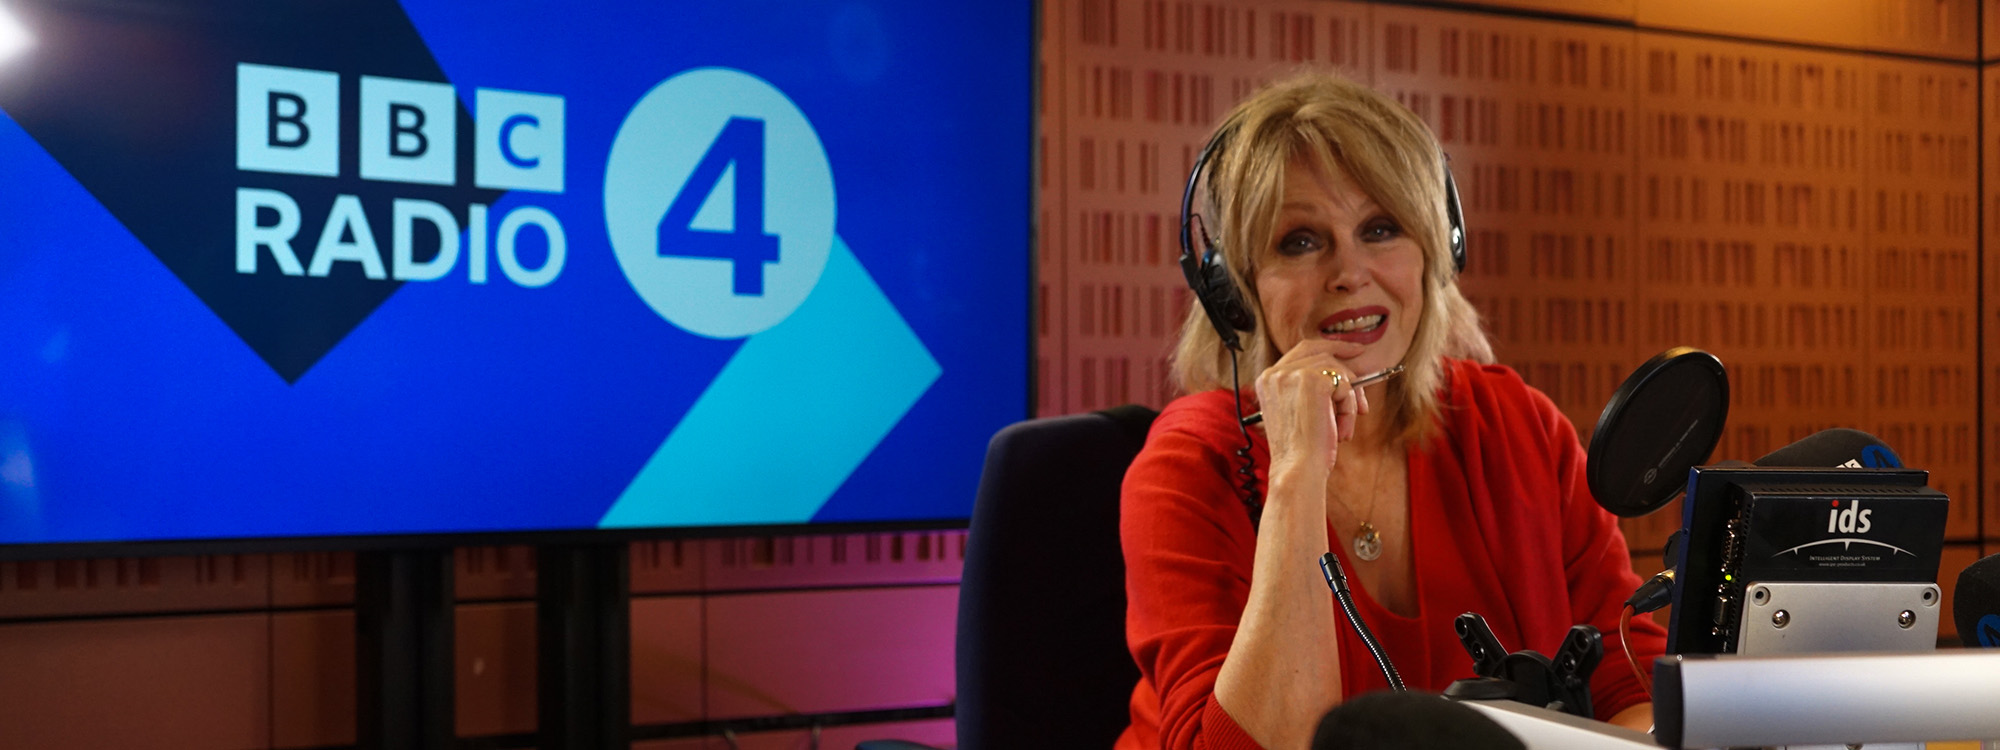 Joanna Lumley sitting in a recording booth with 'BBC Radio 4' on a screen behind her